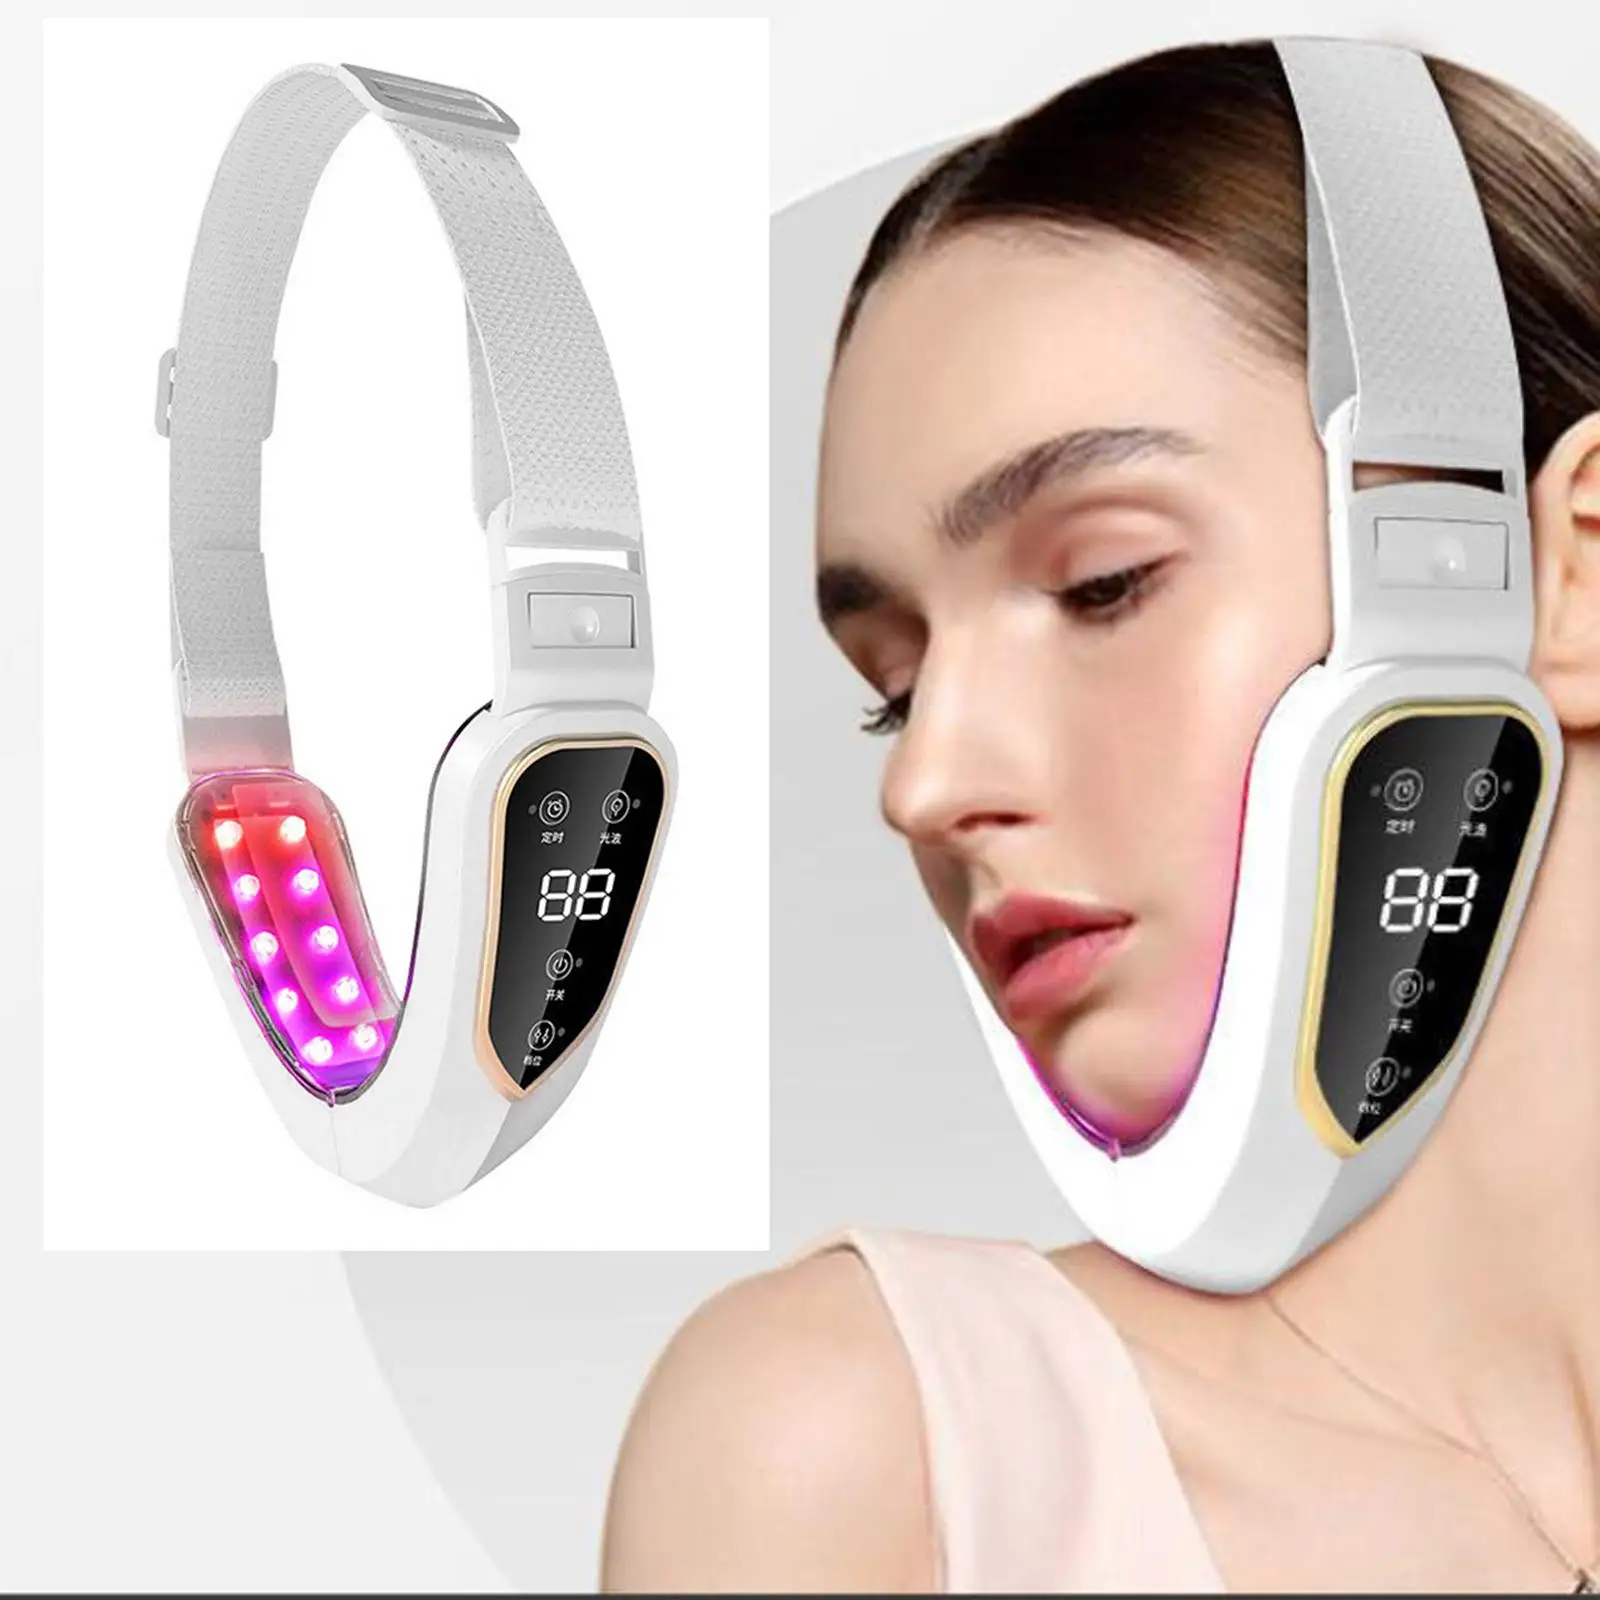 V Face Machine Face Slimming Strap for Therapy Machine Reduce Double Chin, Skin Toning Devices Face Lifting Firming Belt